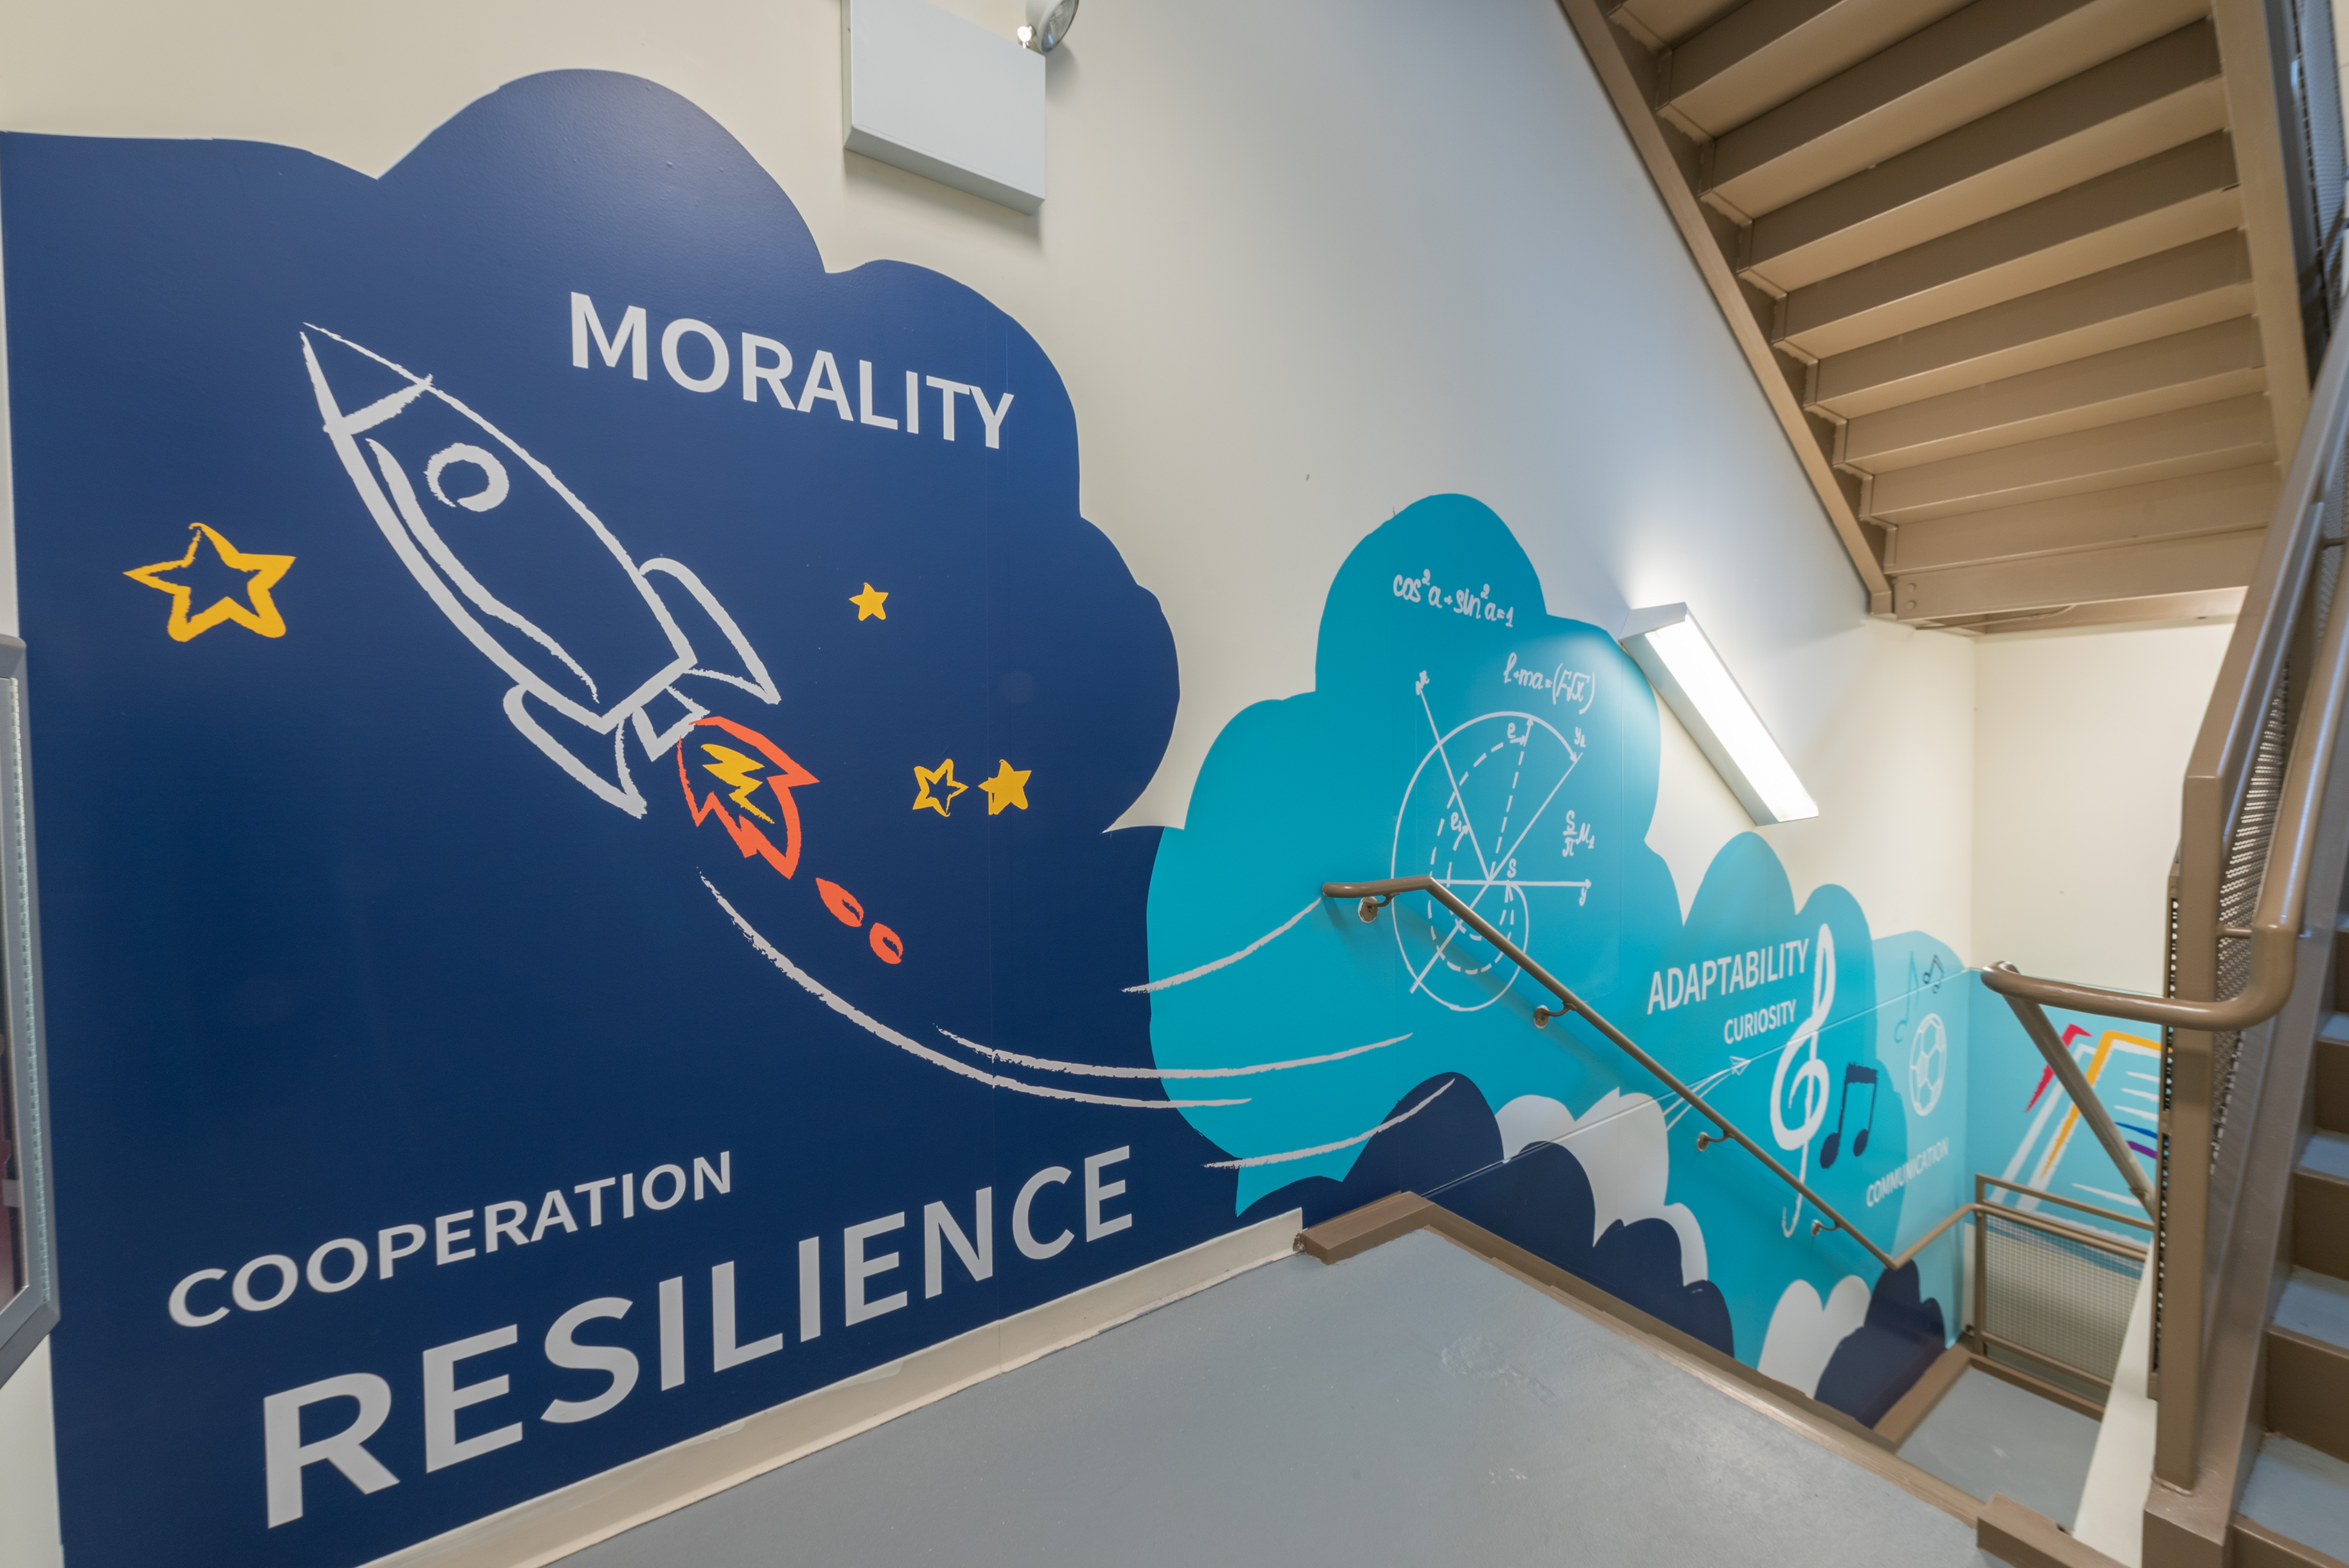 School hallway printed with environmental graphics on wall